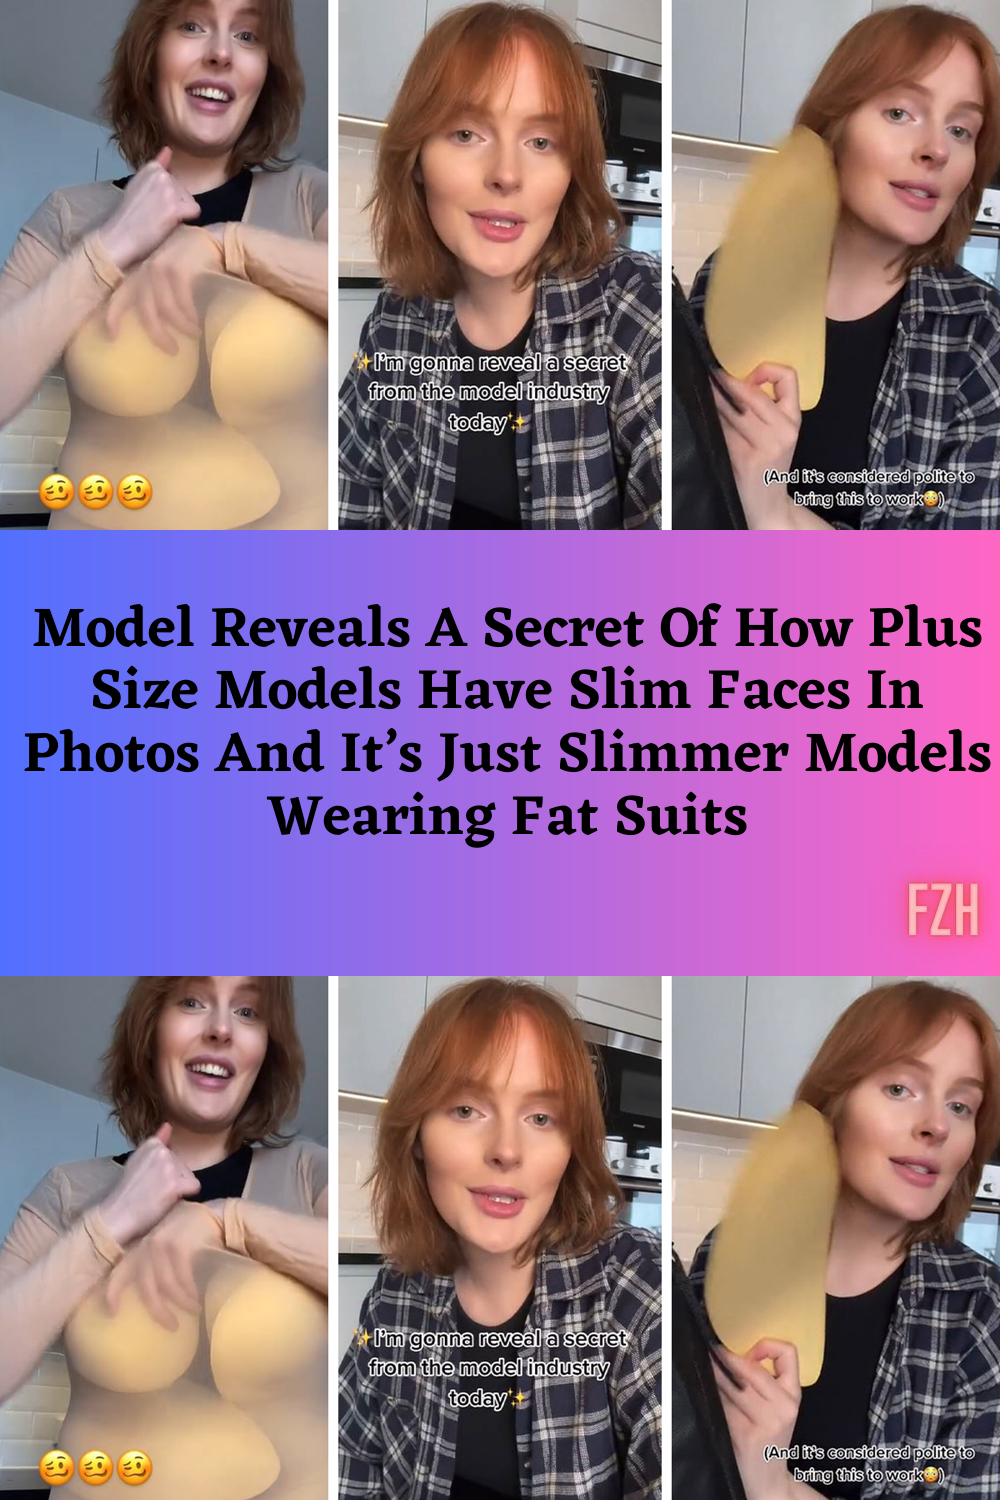 Model Reveals A Secret Of How Plus Size Models Have Slim Faces In Photos And It’s Just Slimmer Model